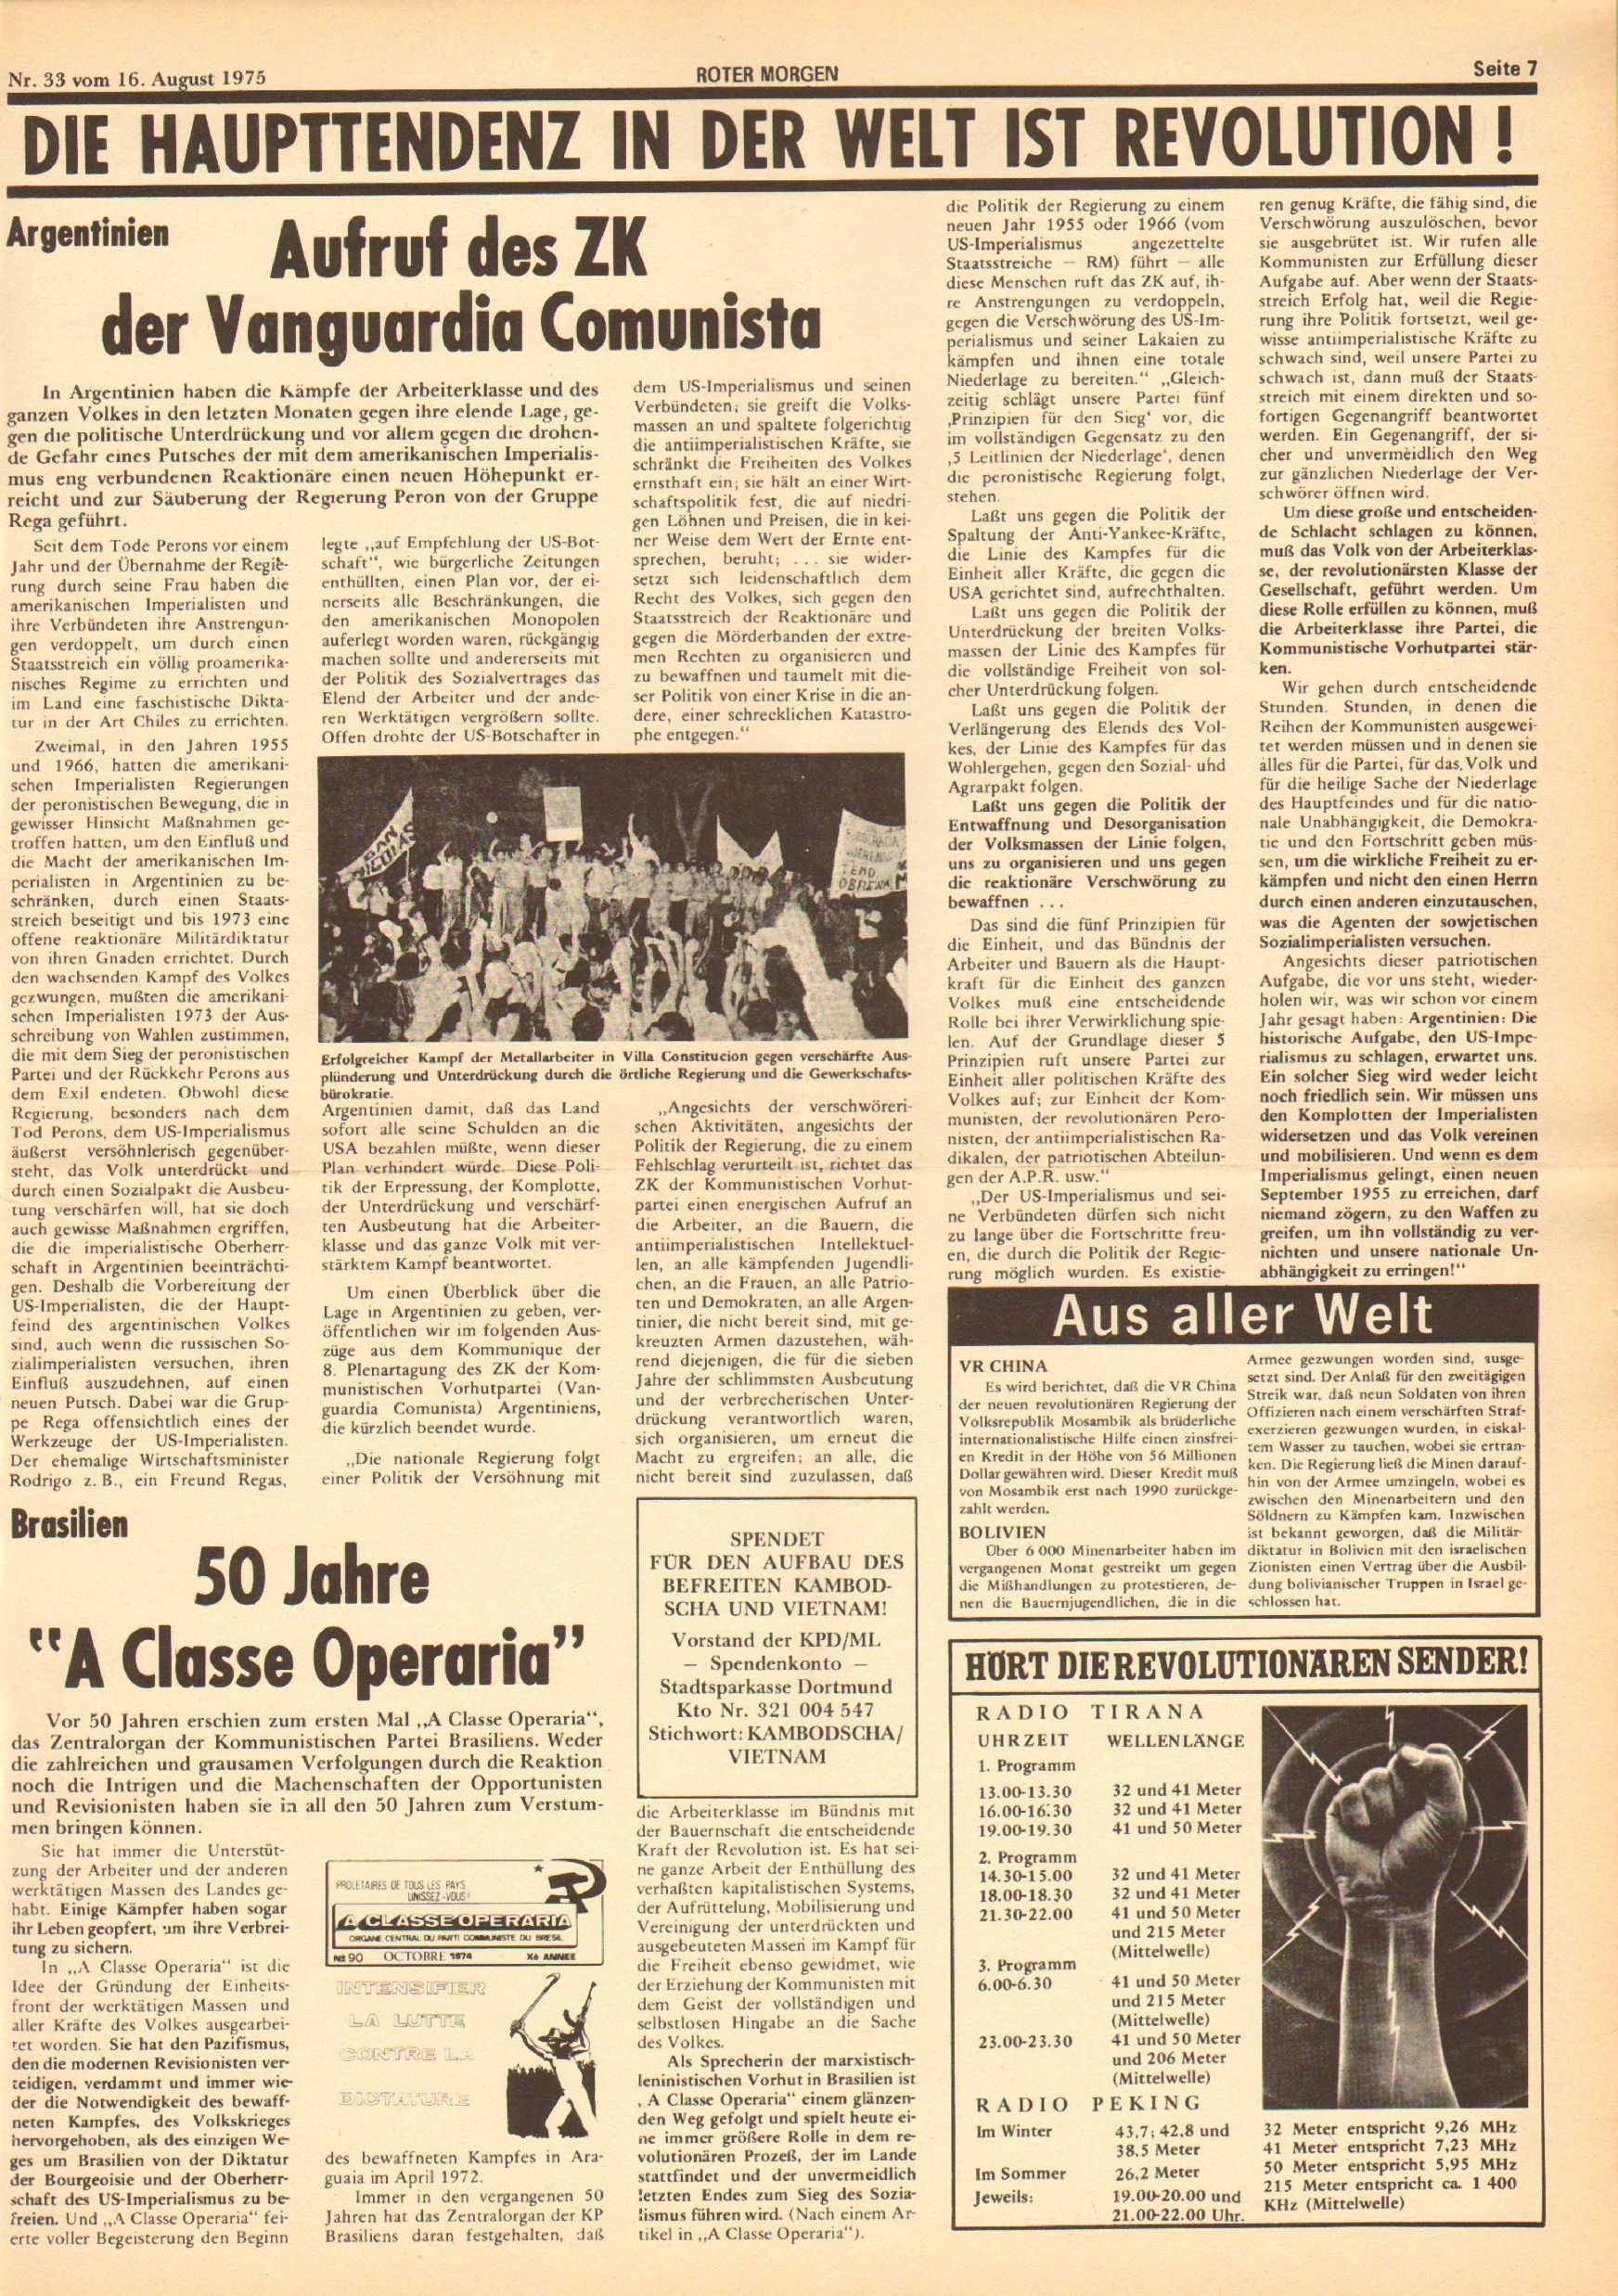 Roter Morgen, 9. Jg., 16. August 1975, Nr. 33, Seite 7